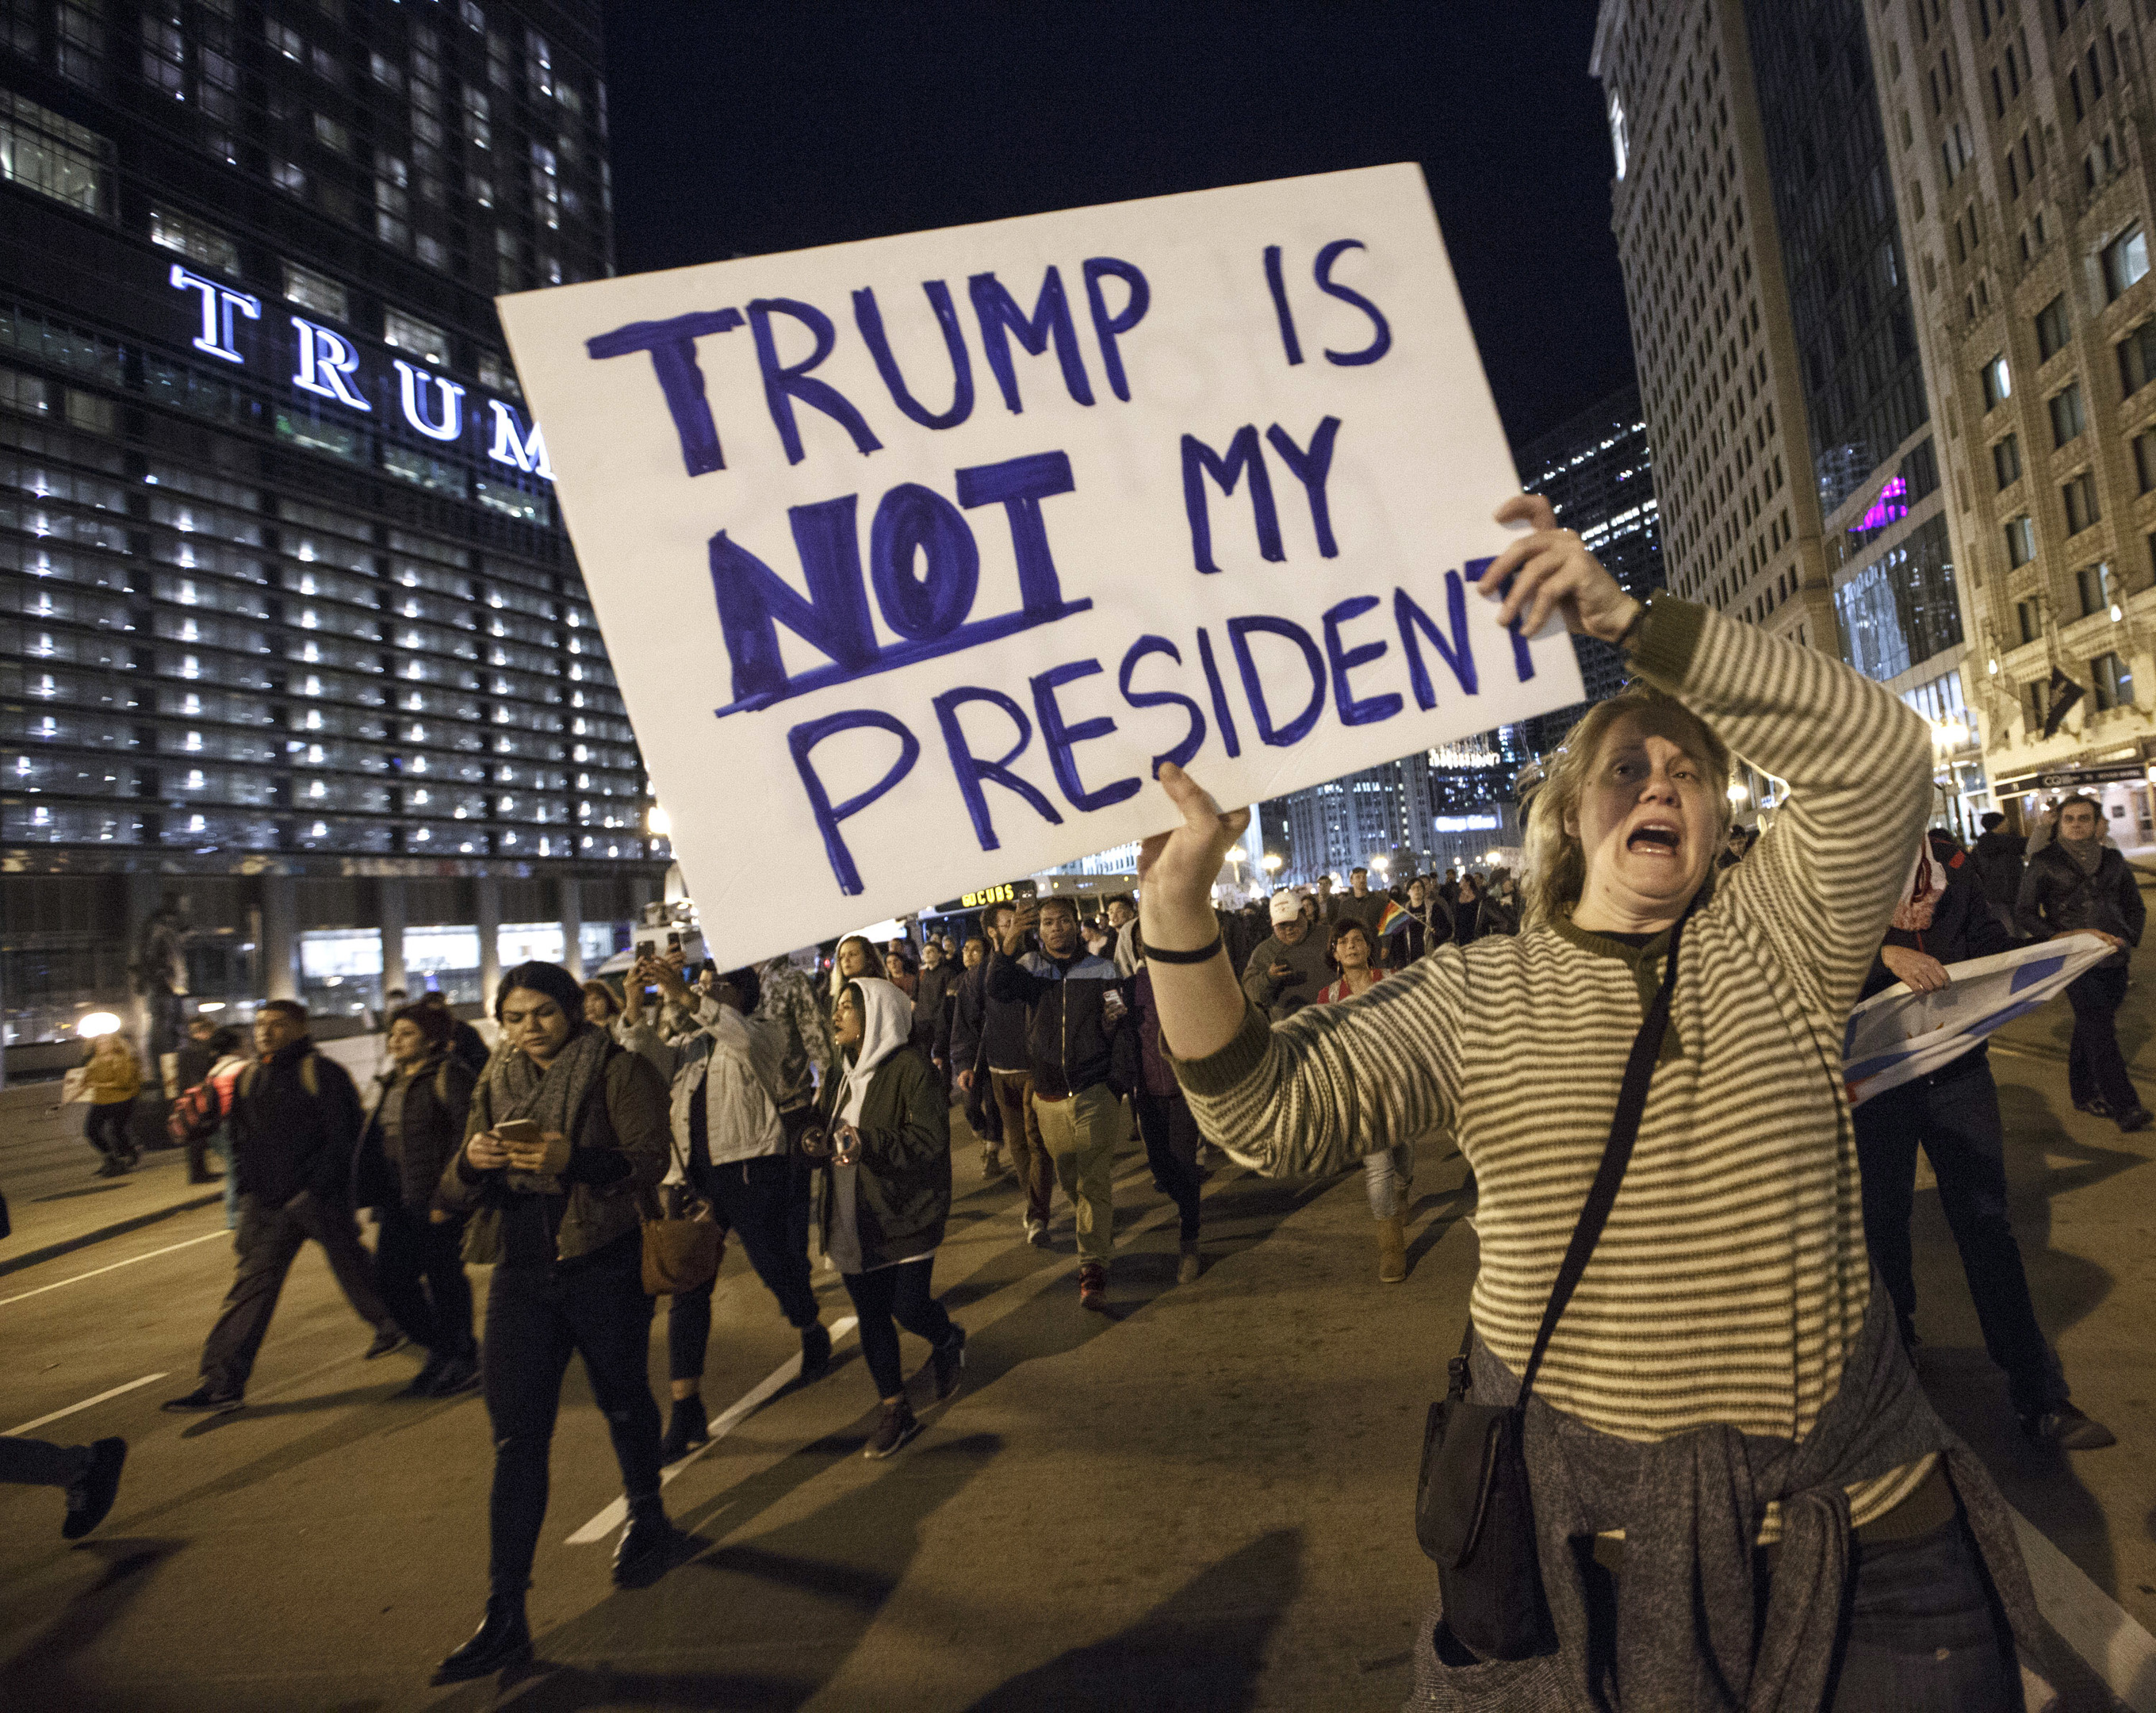 Demonstrators protest outside the Trump Tower in Chicago, Illinois.